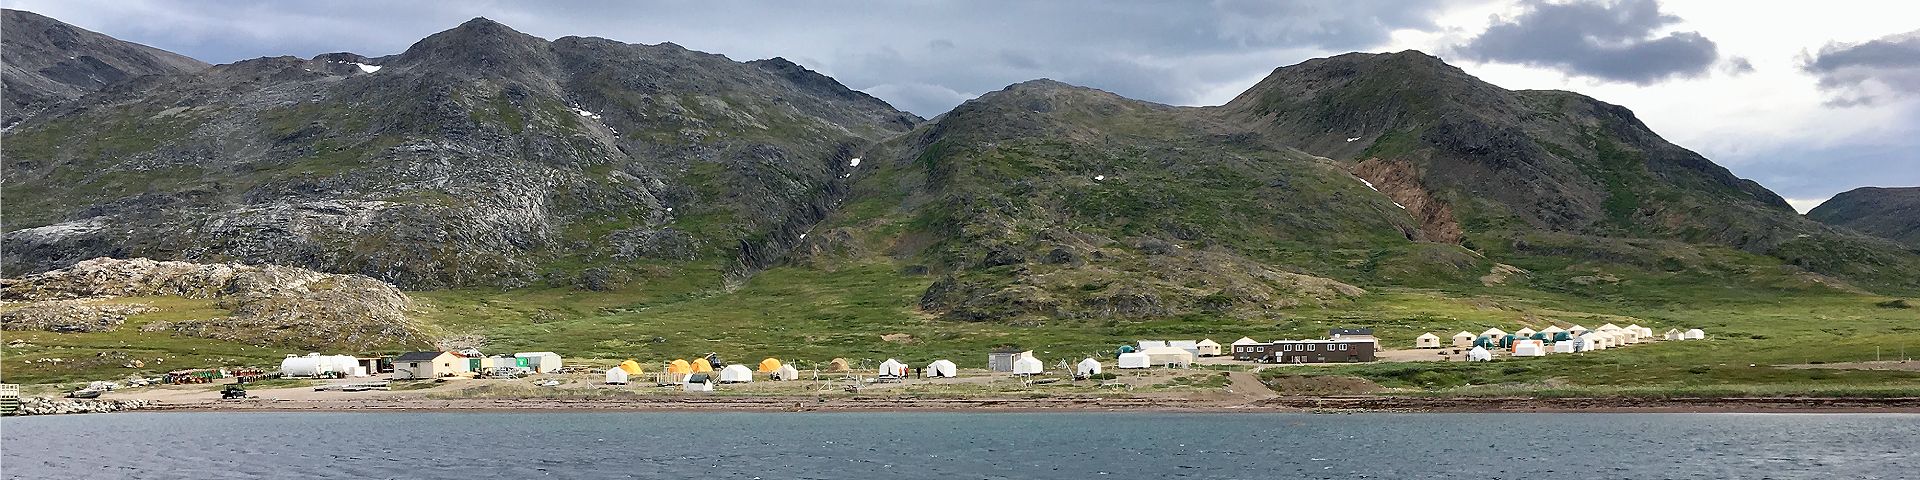 Small buildings and structures along the shore of the base camp at Tongait KakKasuangita SilakKijapvinga-Torngat Mountains National Park